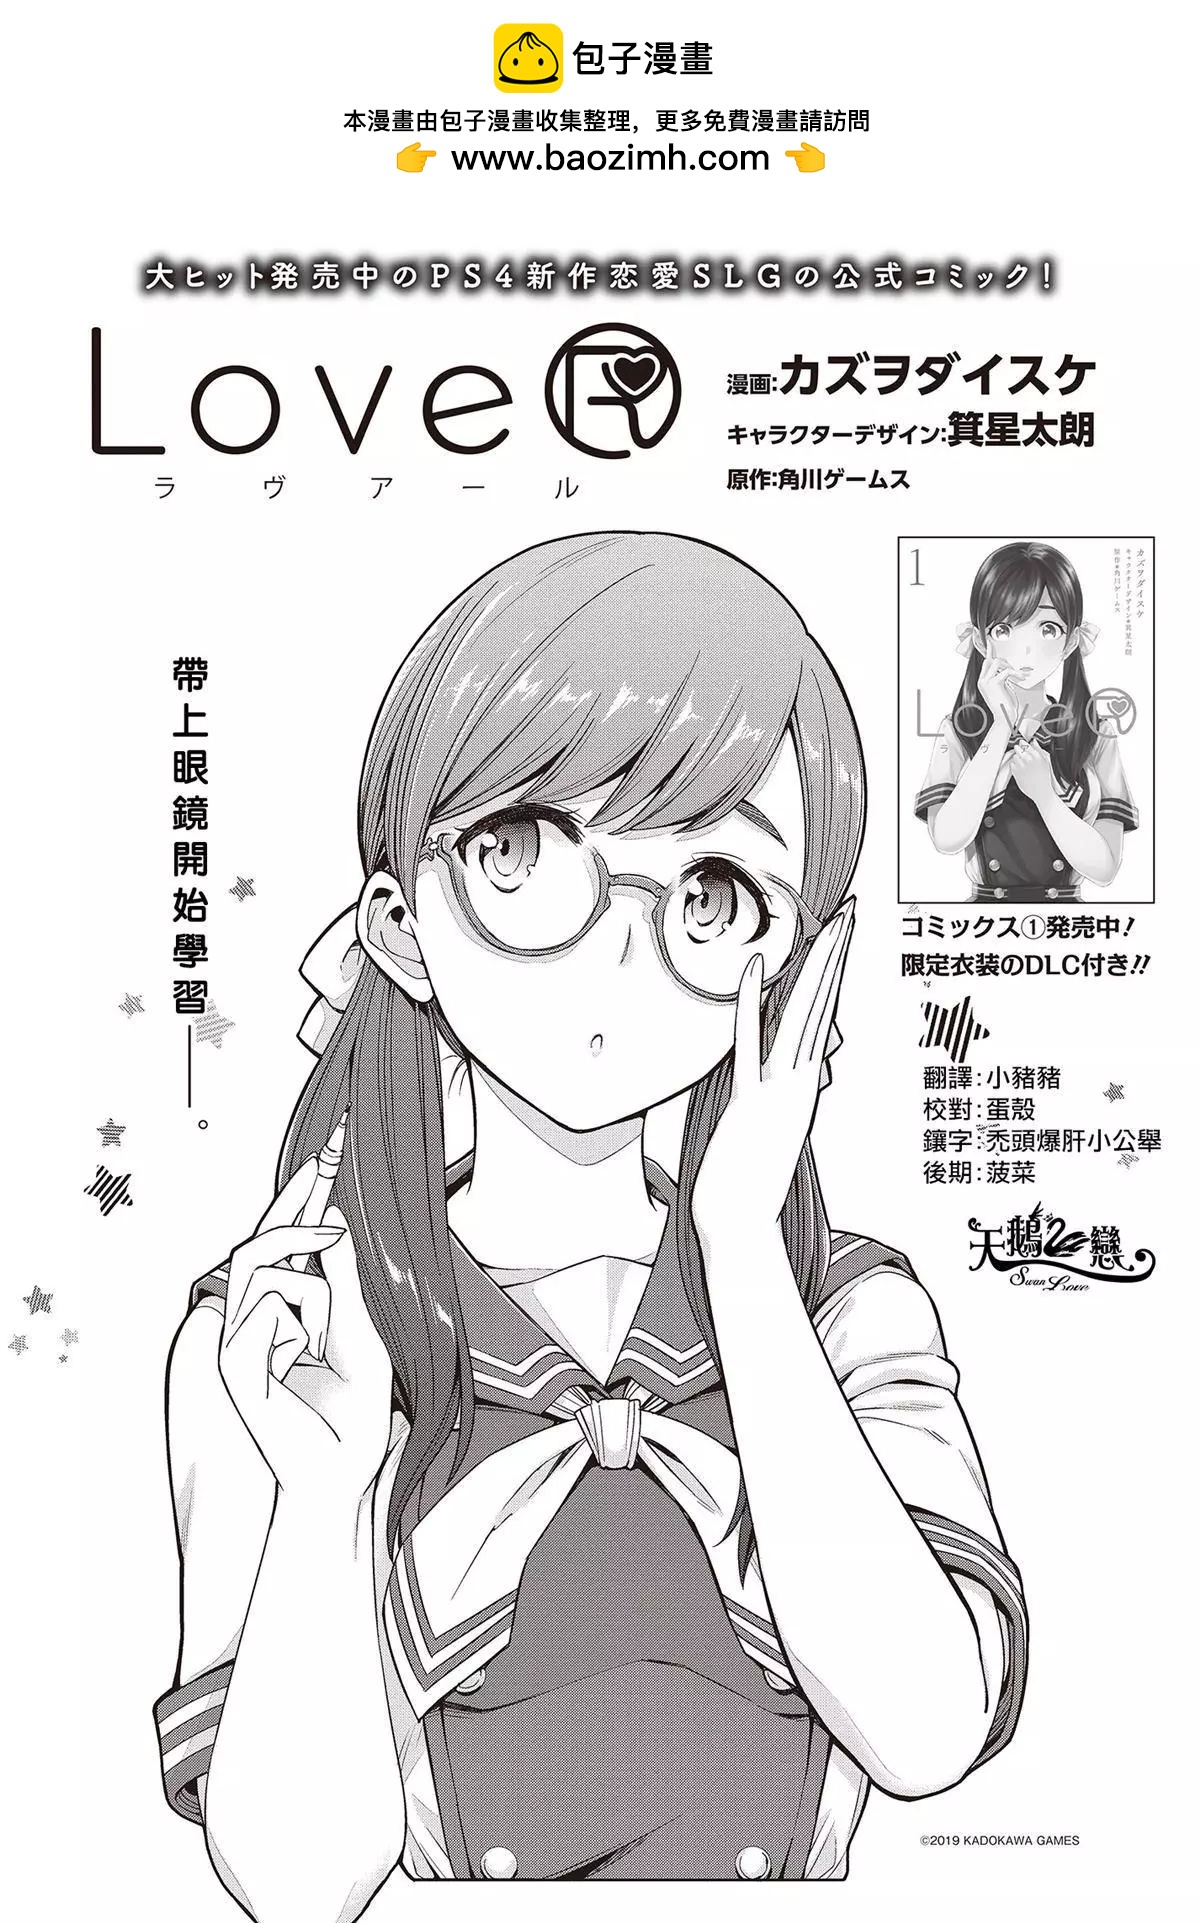 LoveR - 第3話 - 2